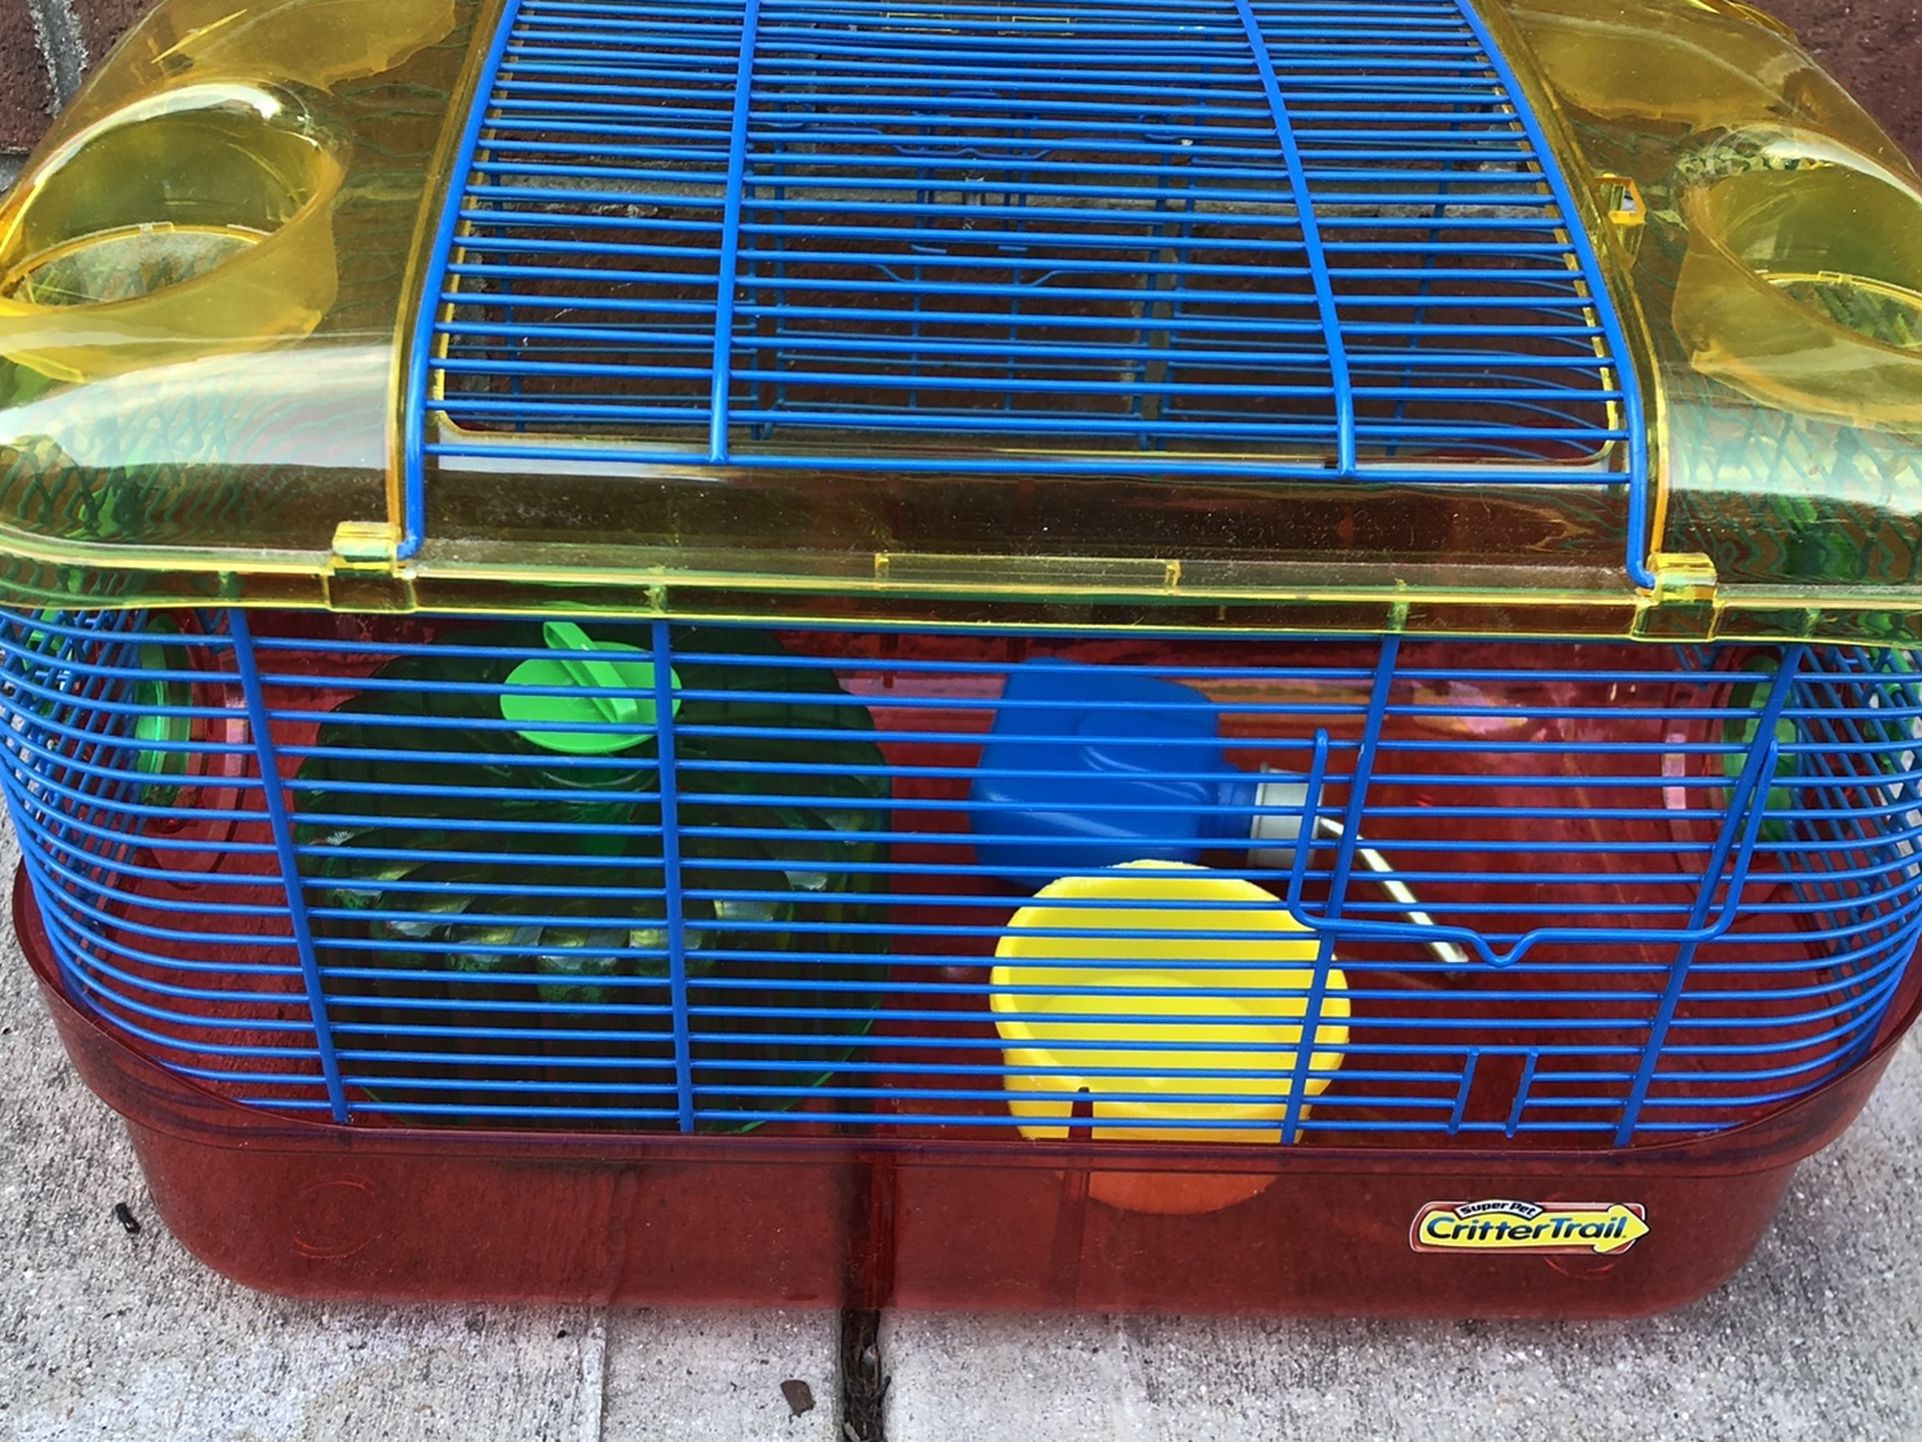 Hamster Or gerbil Cage